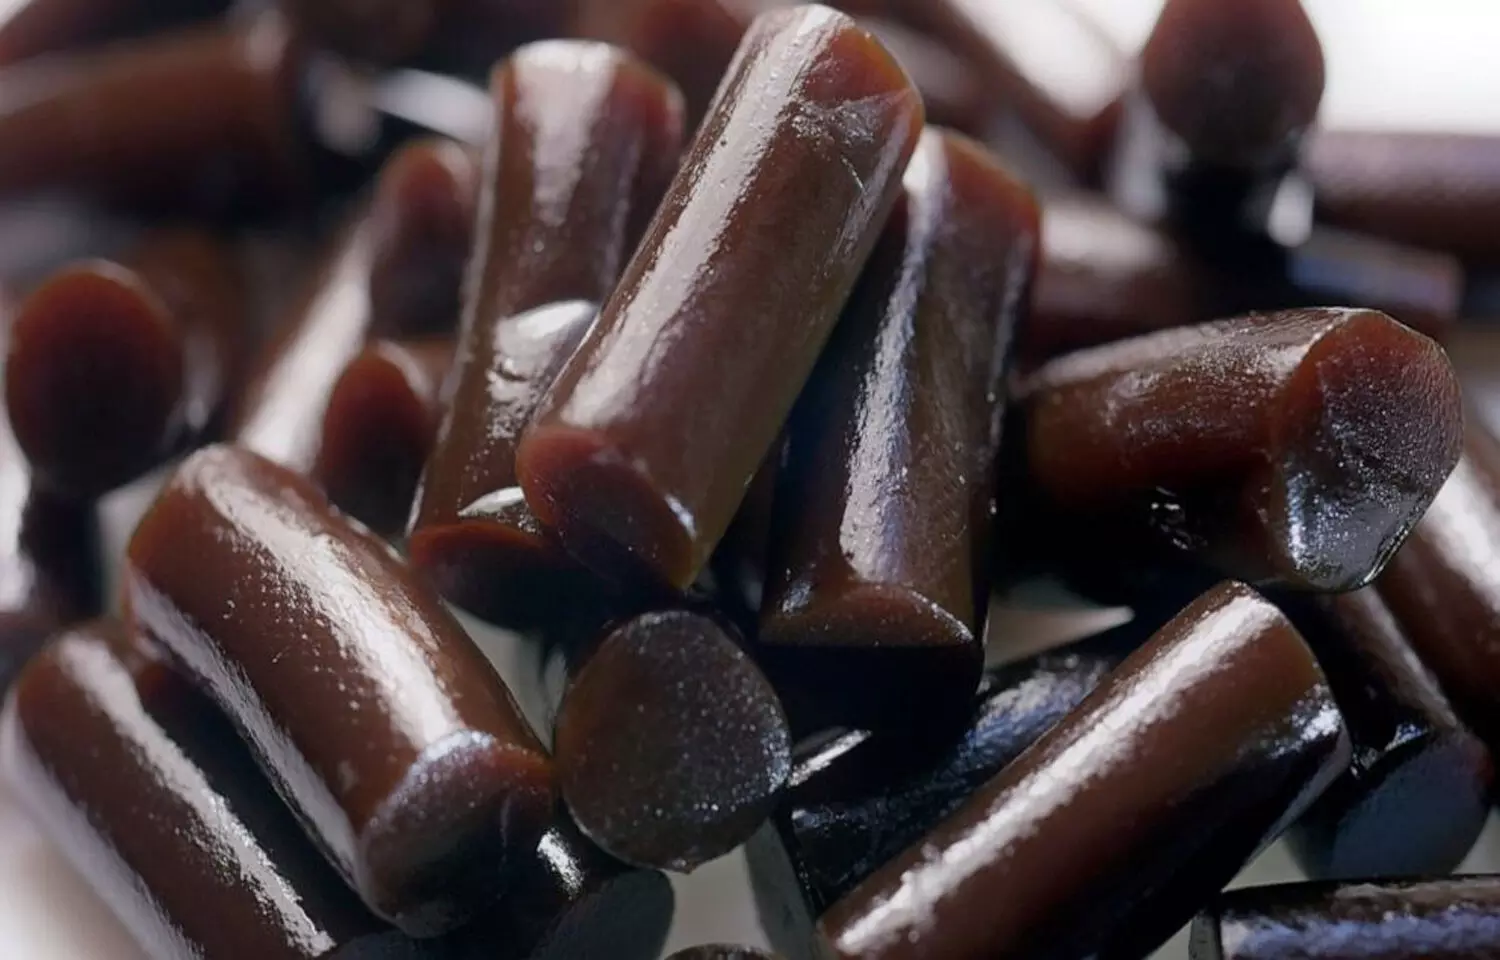 Too much black licorice candy cost man his life: NEJM case report